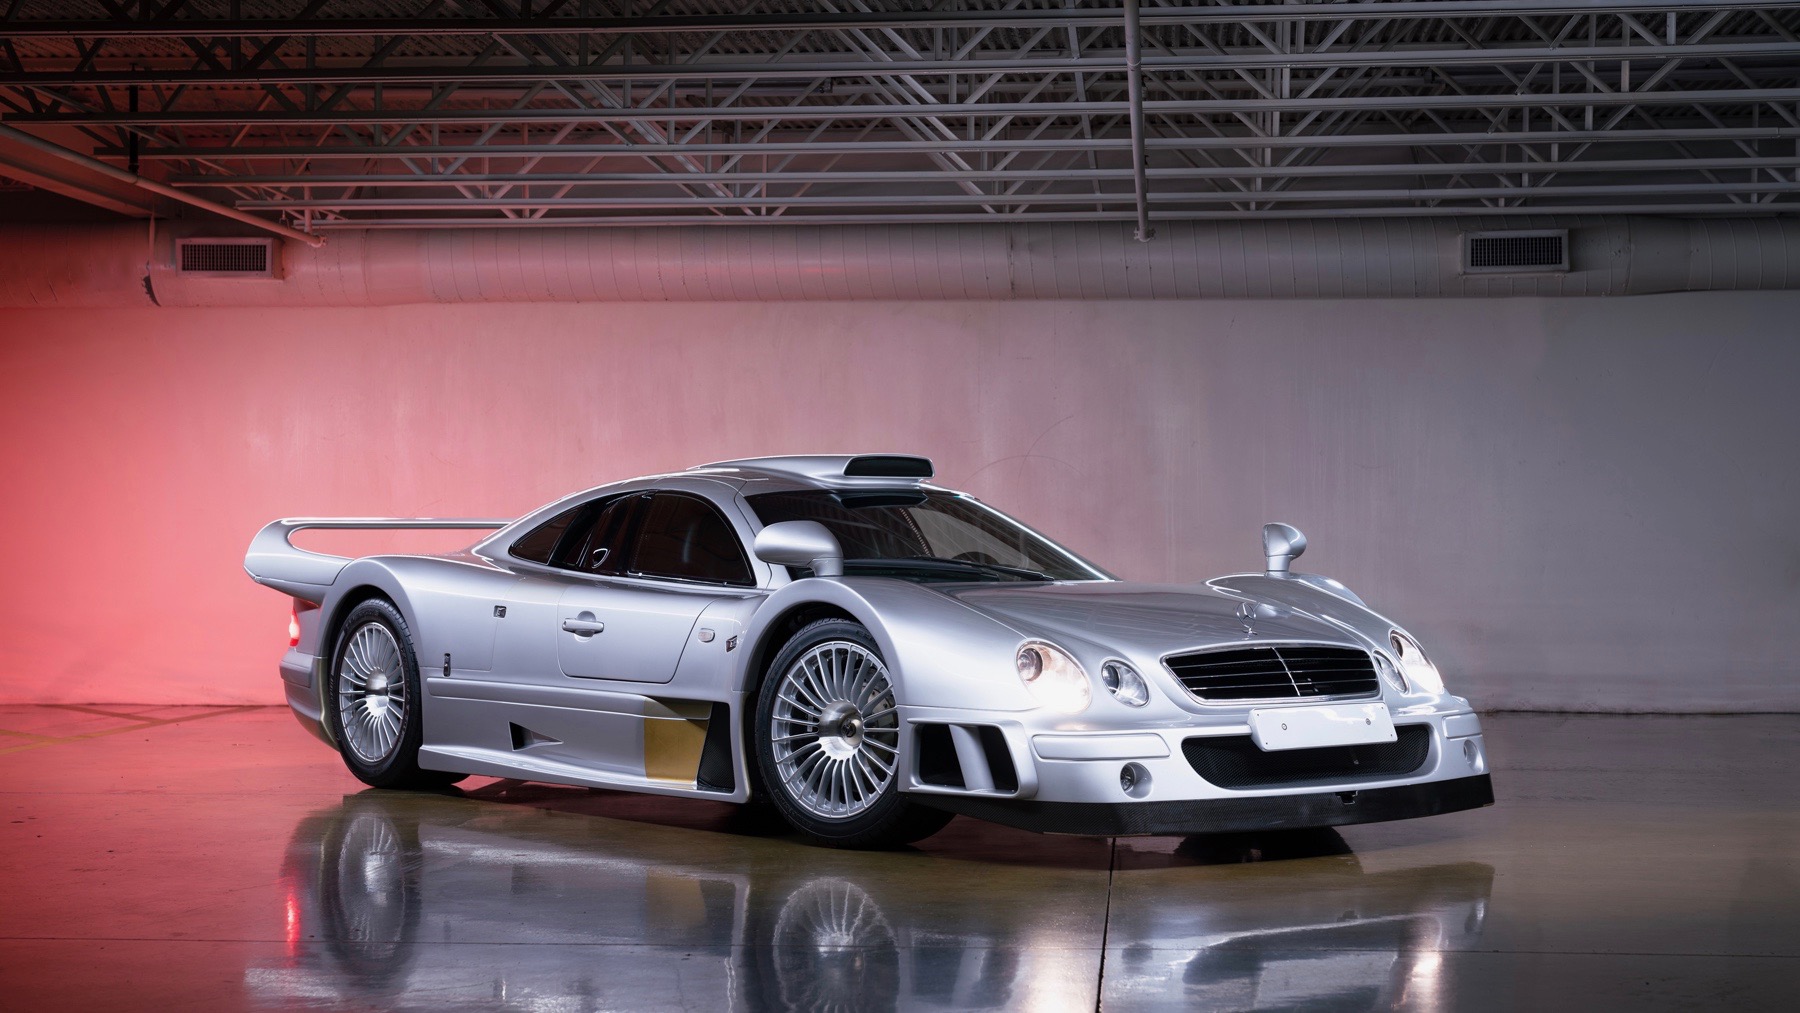 Mercedes-Benz CLK GTR owner’s guide video details the race car for the road